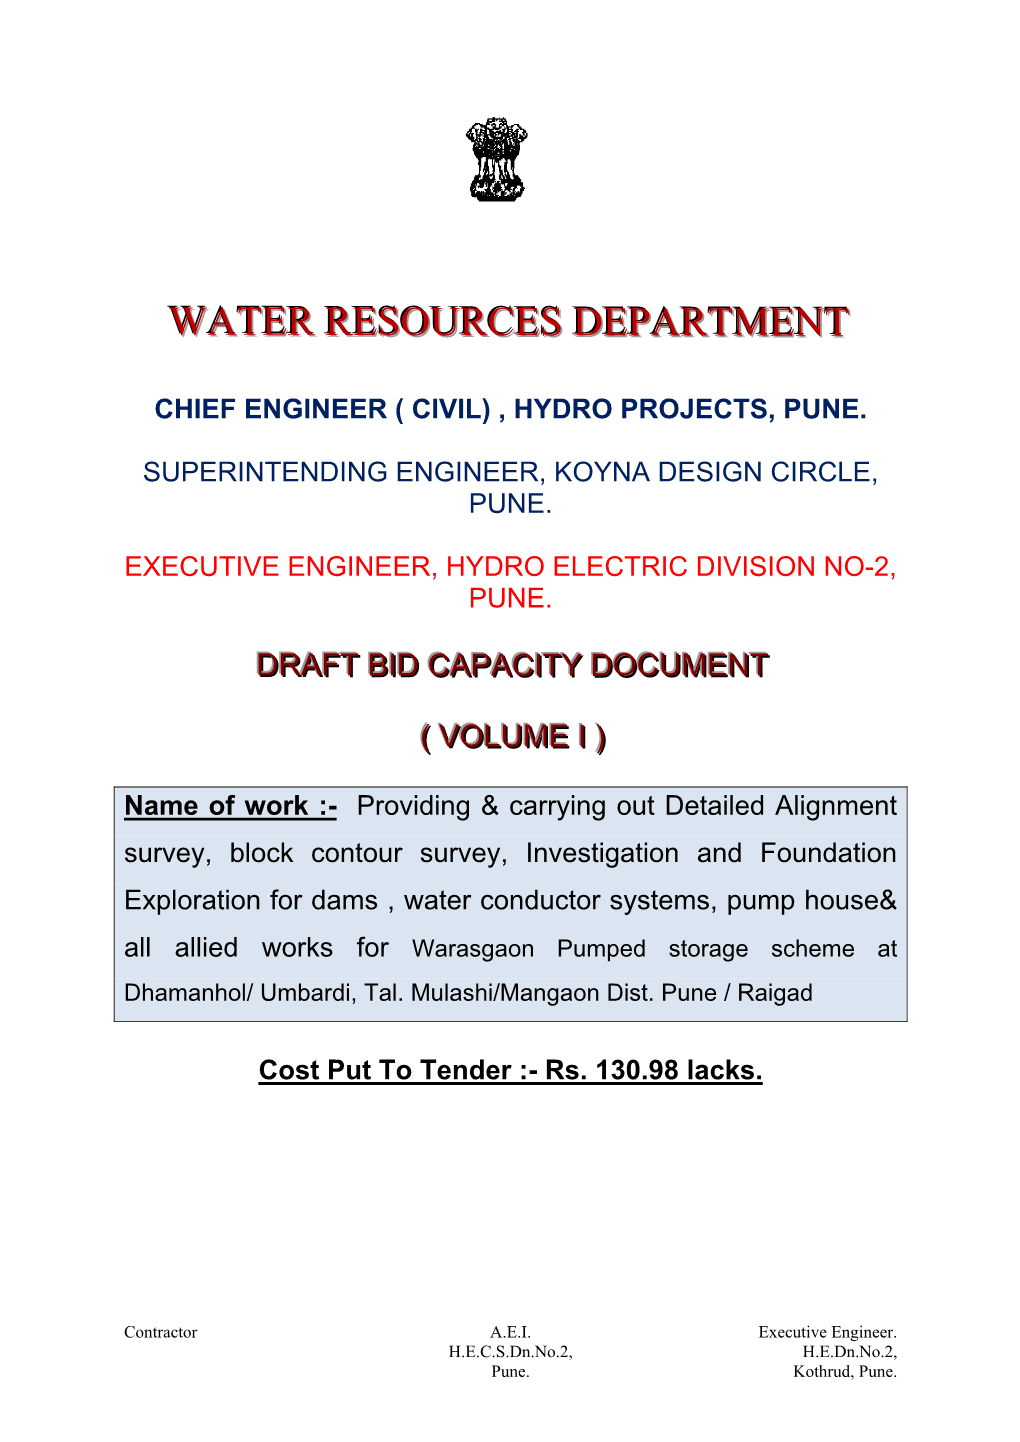 Water Resources Department of Government of Maharashtra, I.E